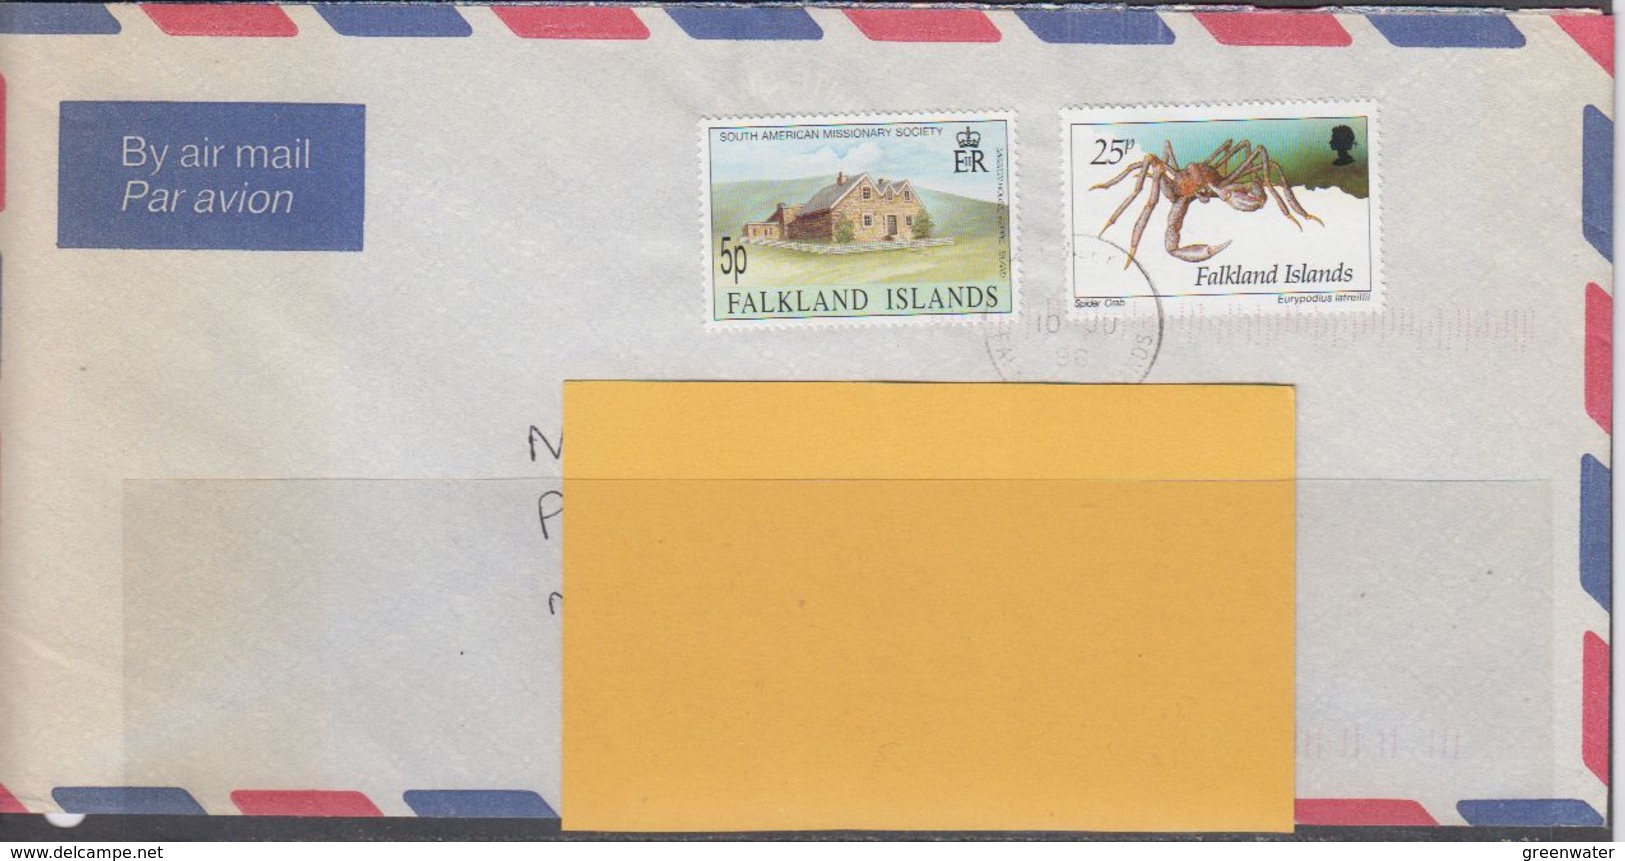 Falkland Islands 1996 Air Mail Cover With 2 Stamps (F7535) - Islas Malvinas